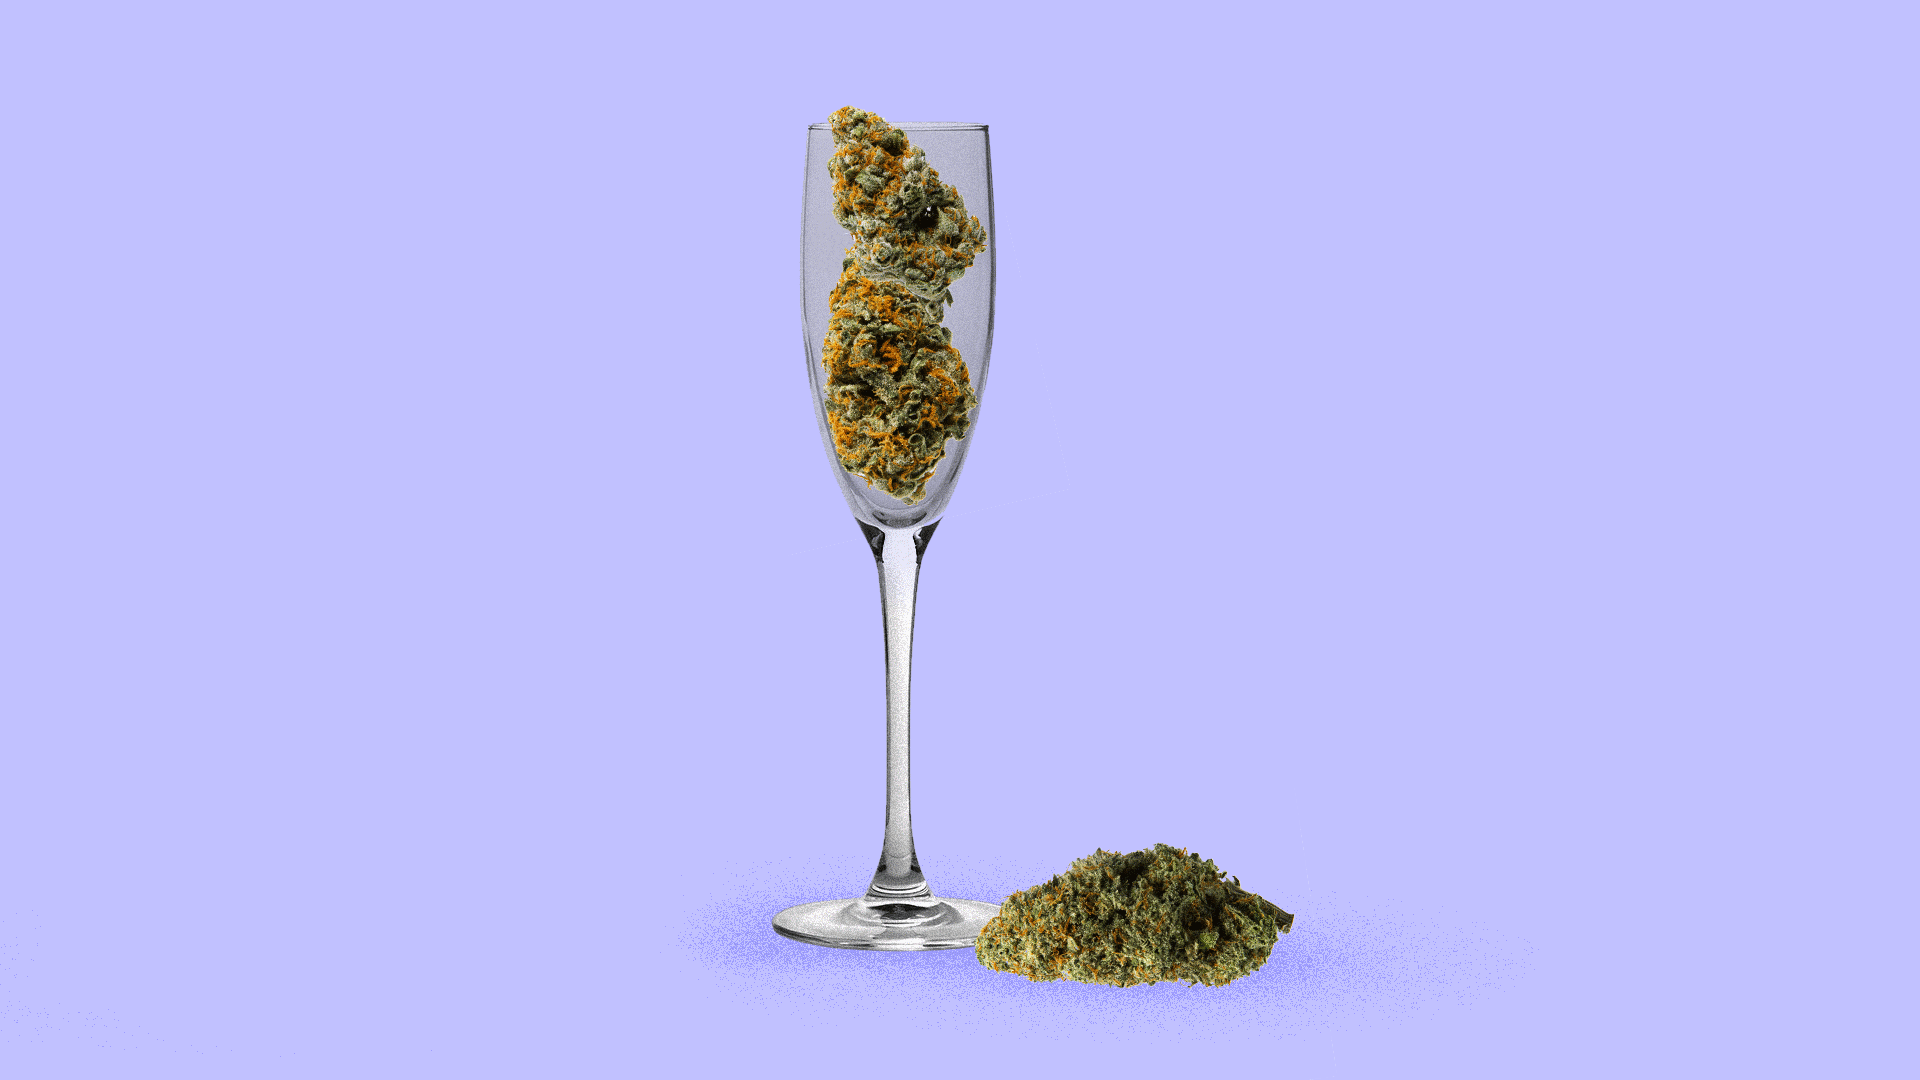 Illustration of marijuana buds in a champagne flute